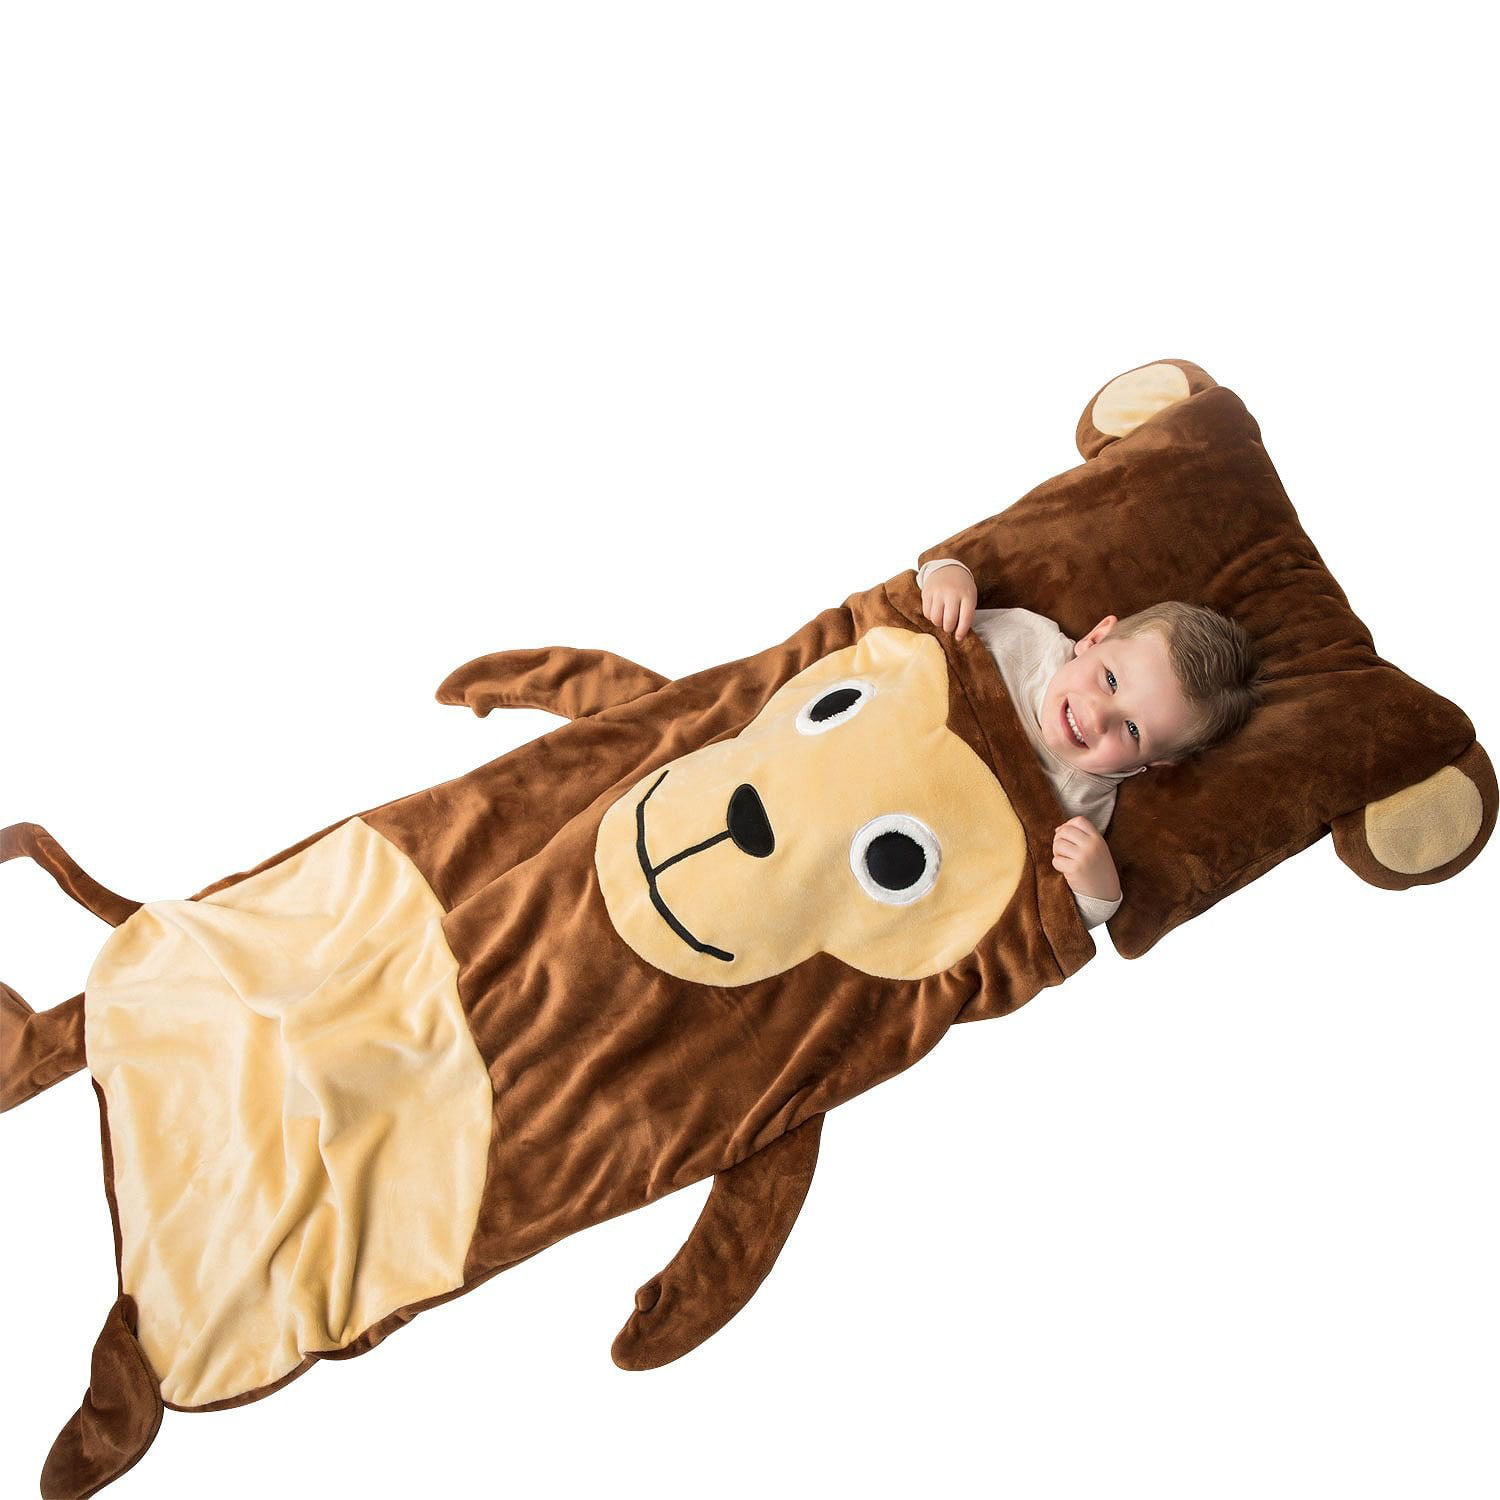 Sleeping bag With Pillow And Pillowcase For 18 Inch Doll Or Stuffed animal. 